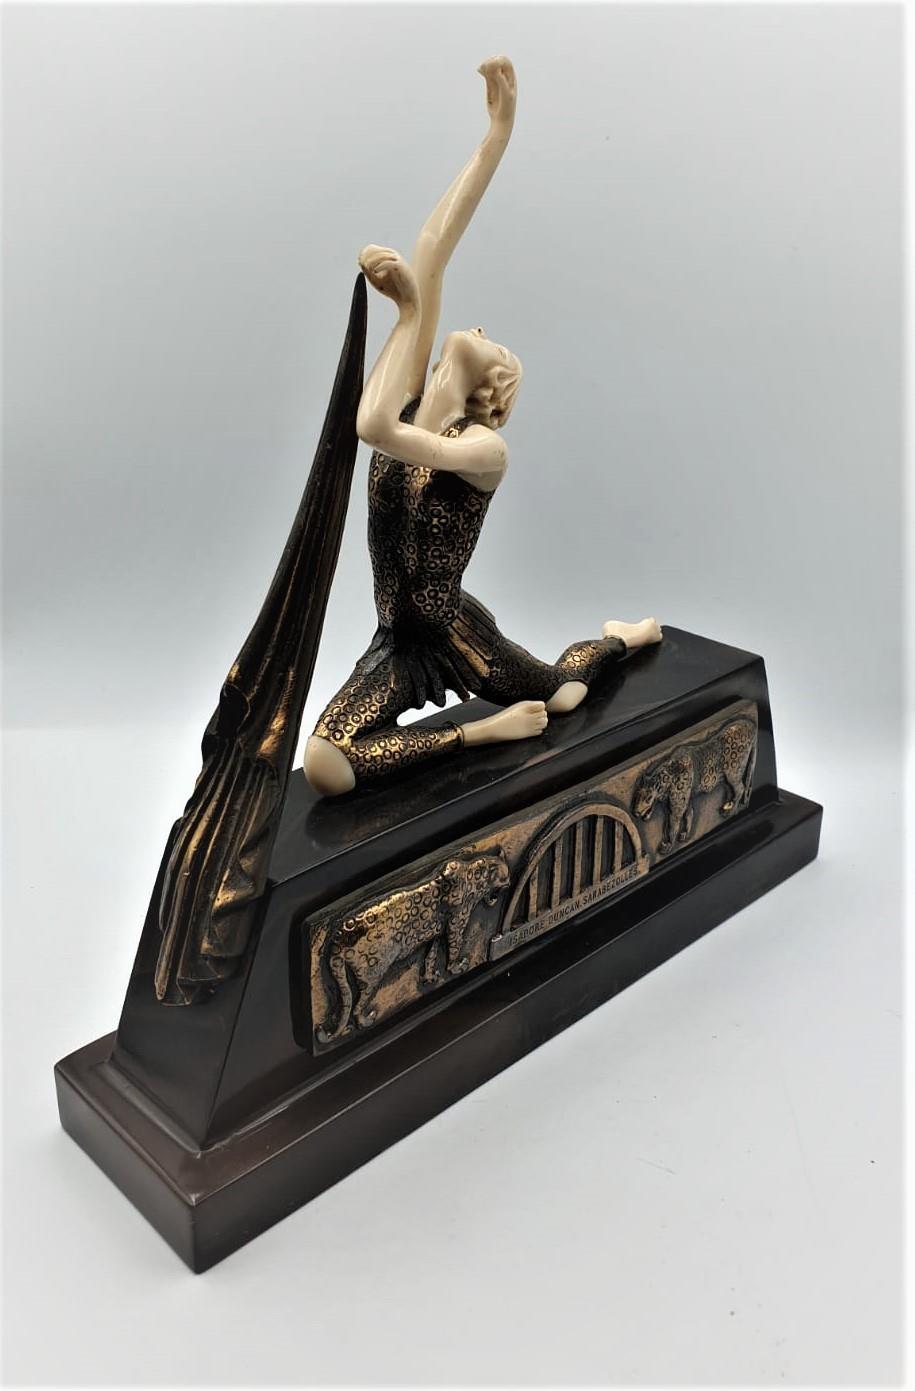 Art deco bronze statue of Isadore Duncan by Sarabezolles on marble base - Image 3 of 6